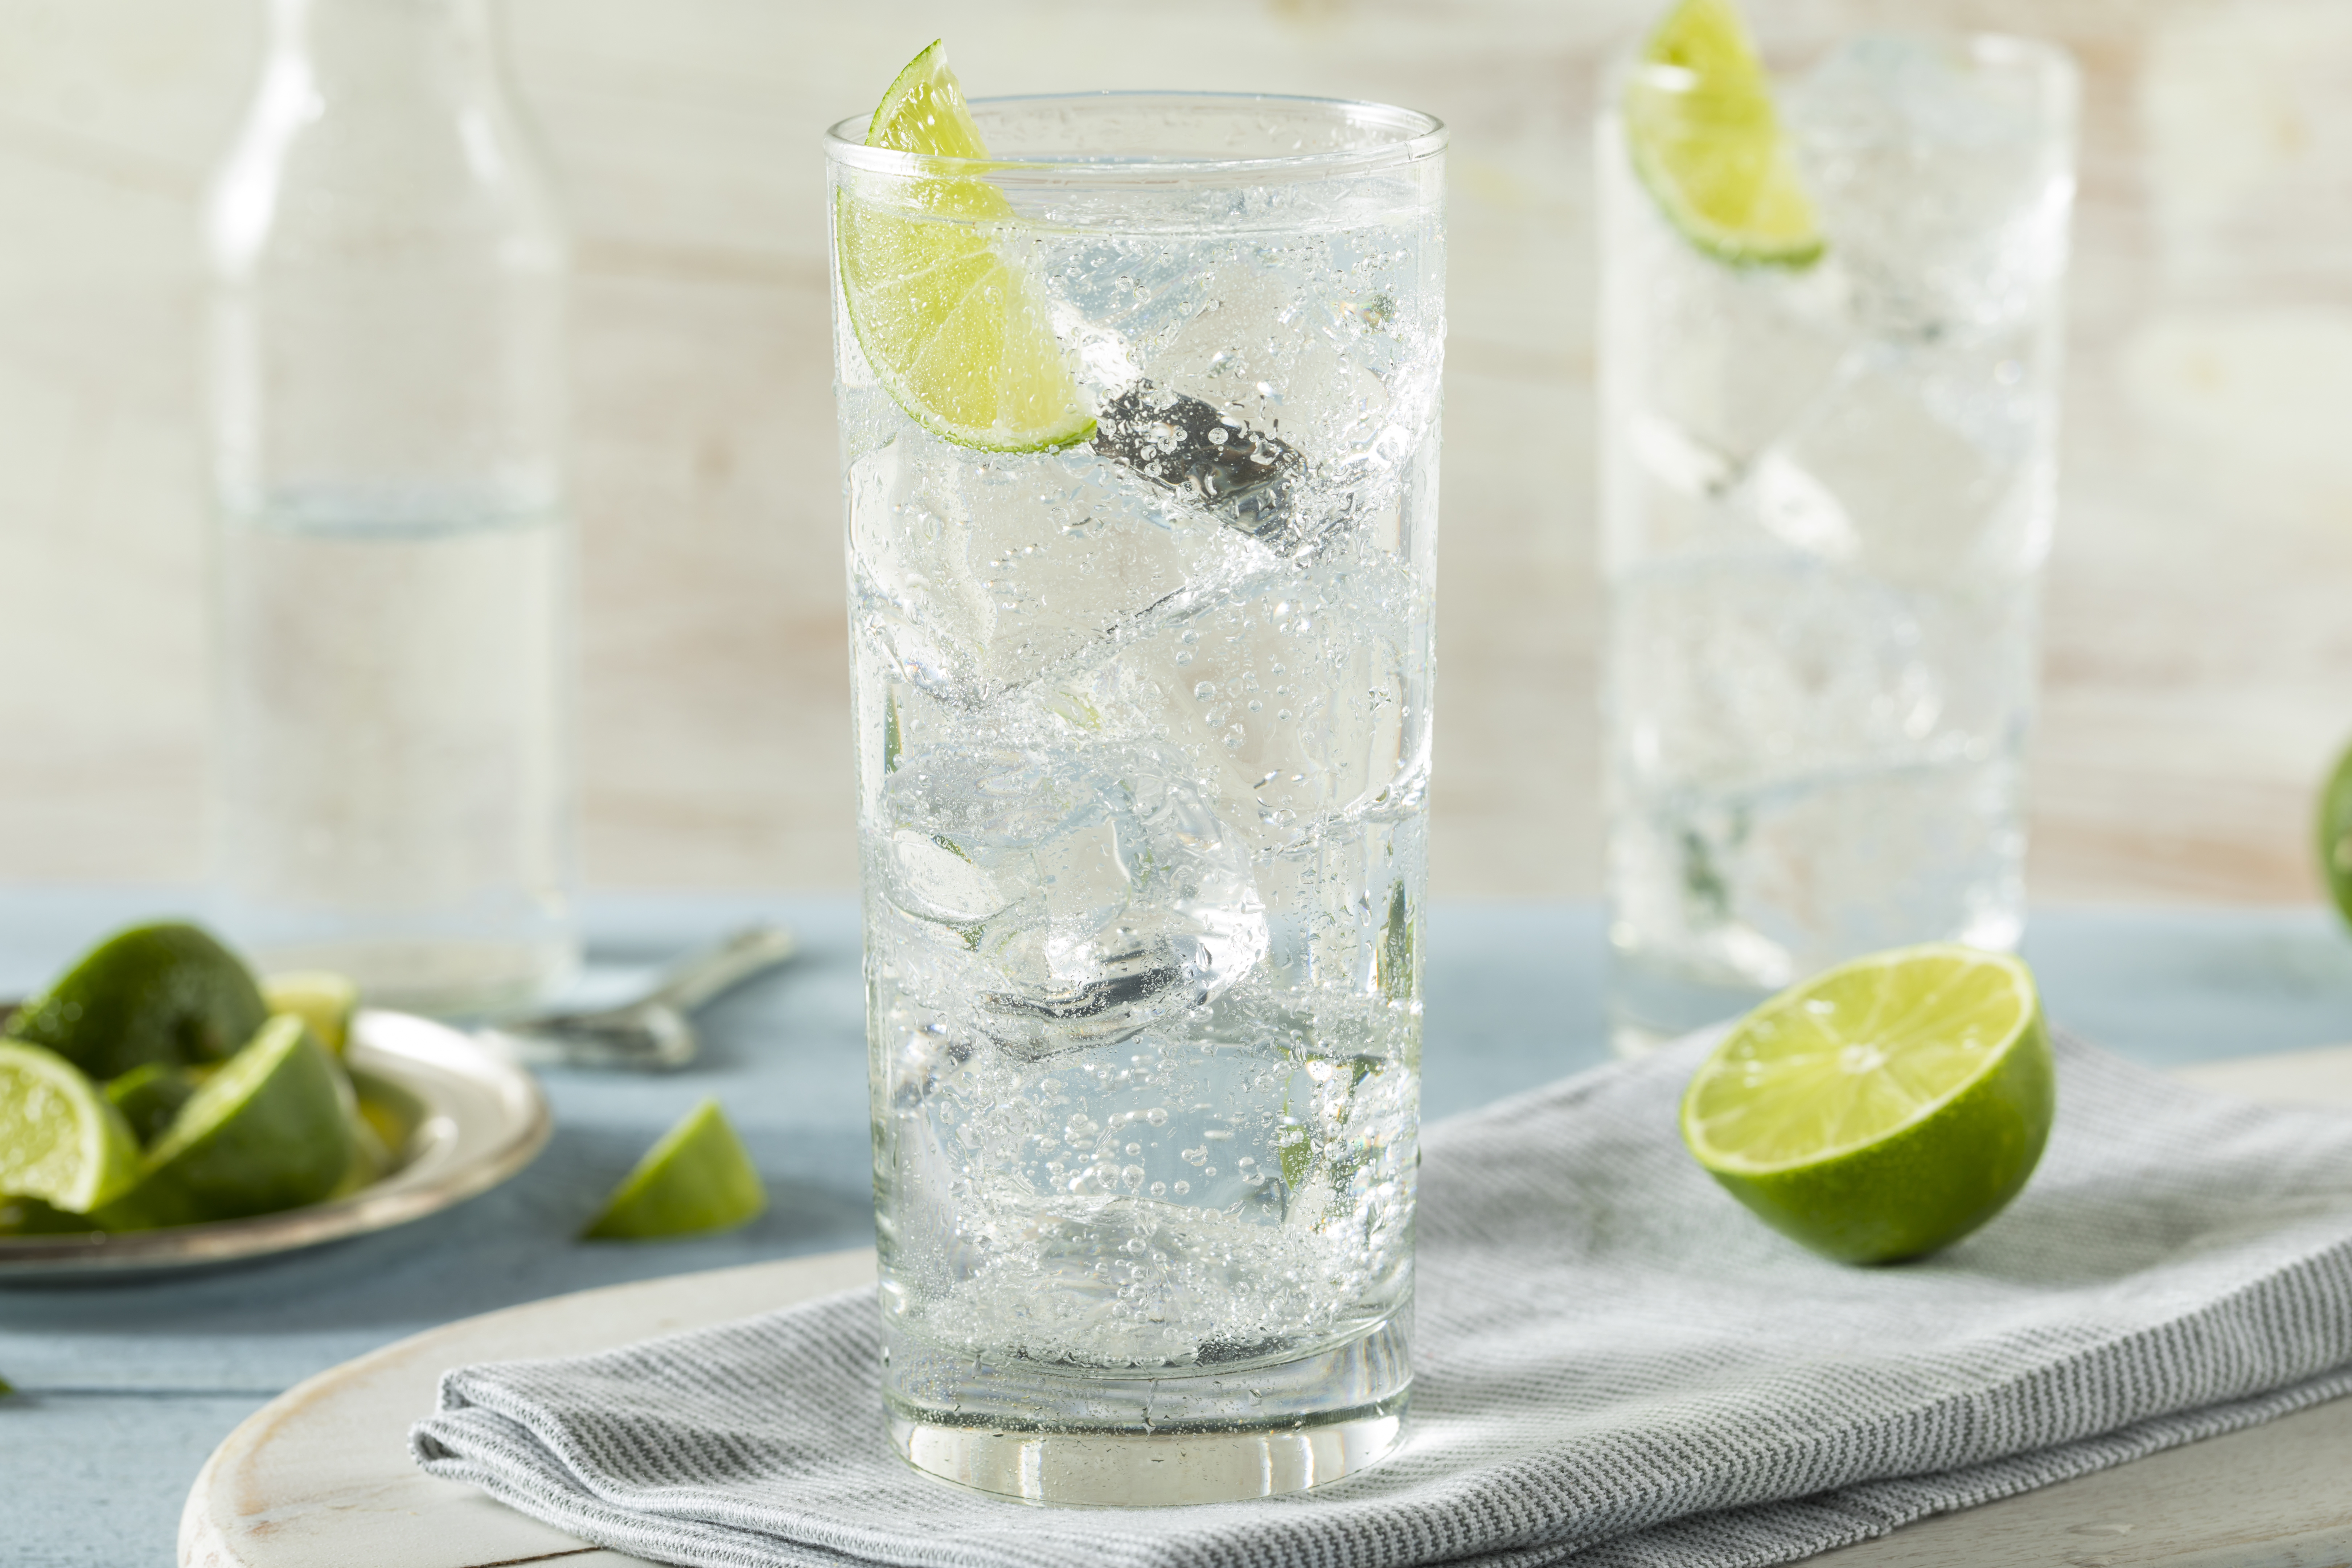 Is Carbonated Sparkling Water Good Or Bad? | Worldhealth.net Anti-Aging